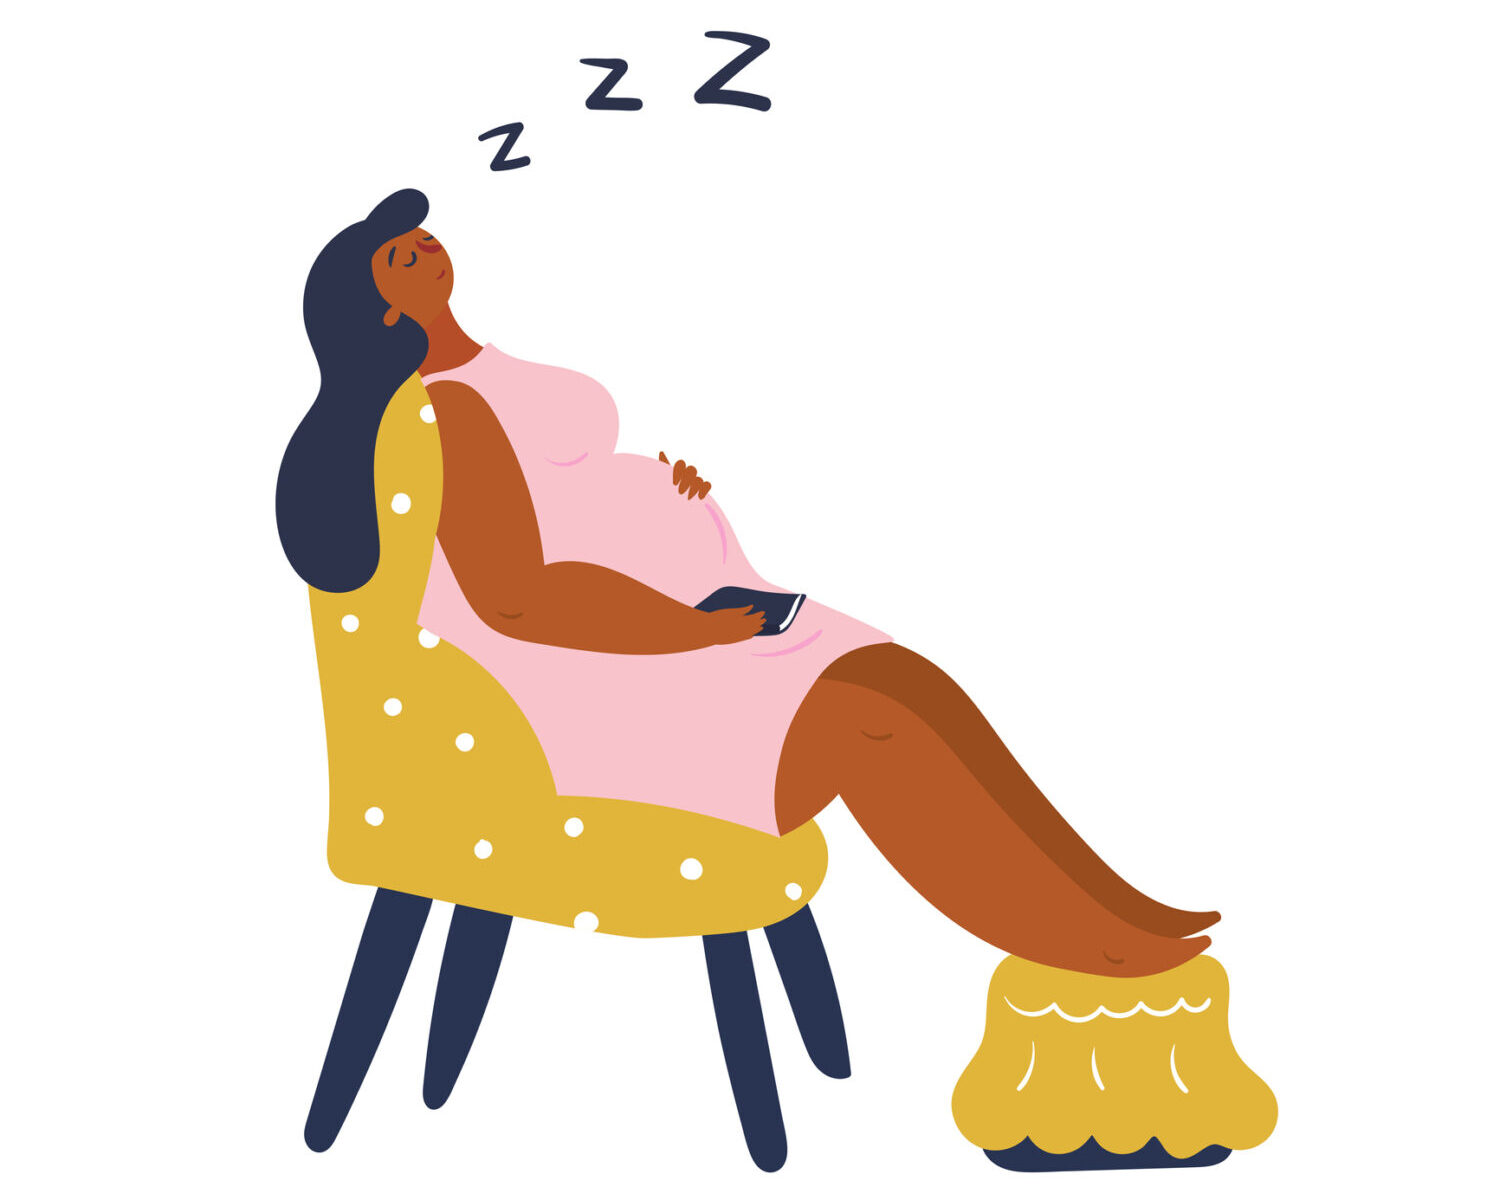 Illustration of a pregnant women sleeping upright in a chair